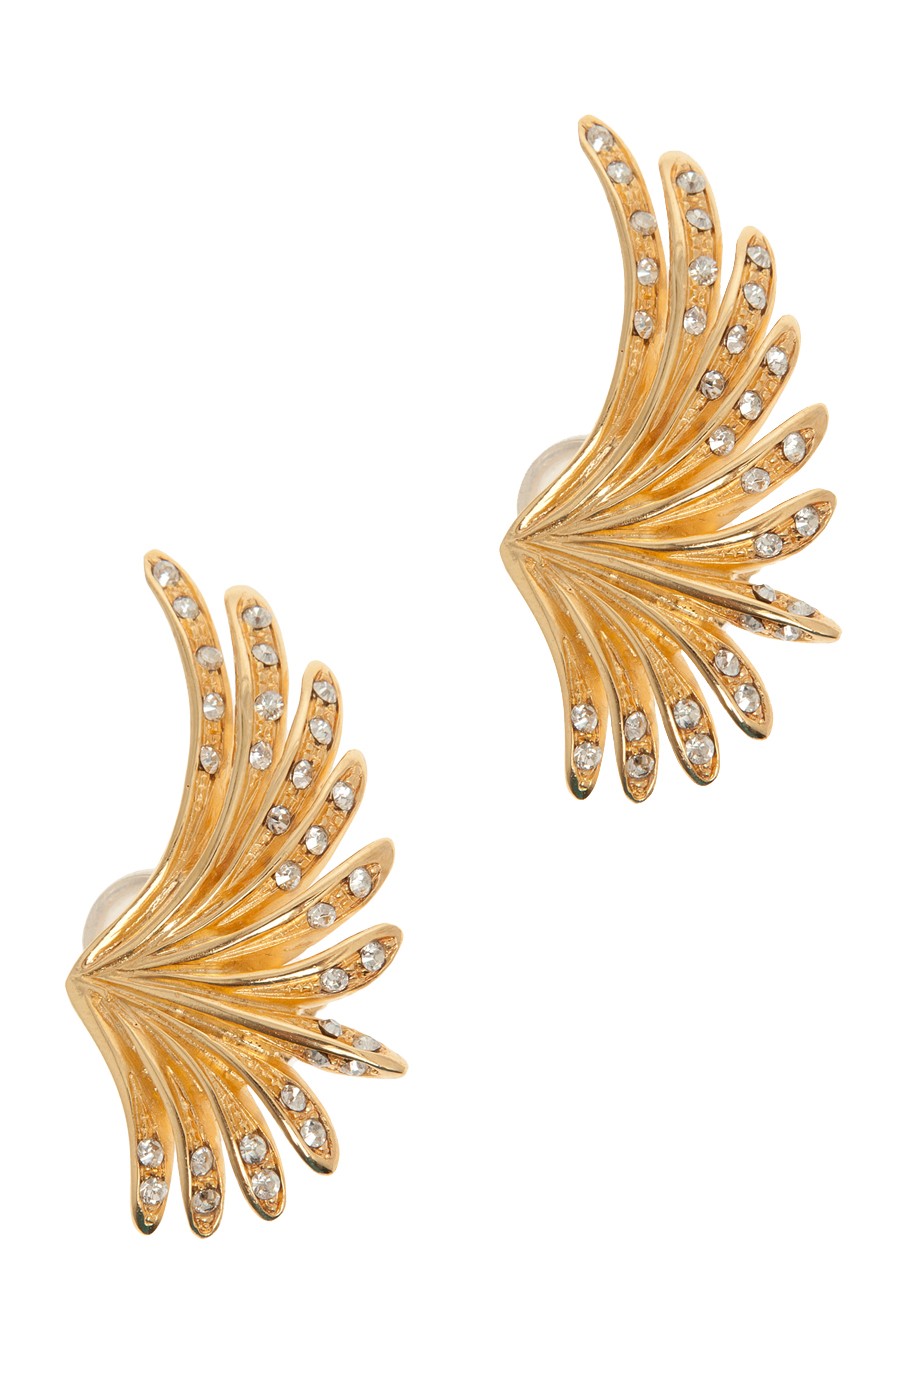 Two golden wing-shaped earrings free image download